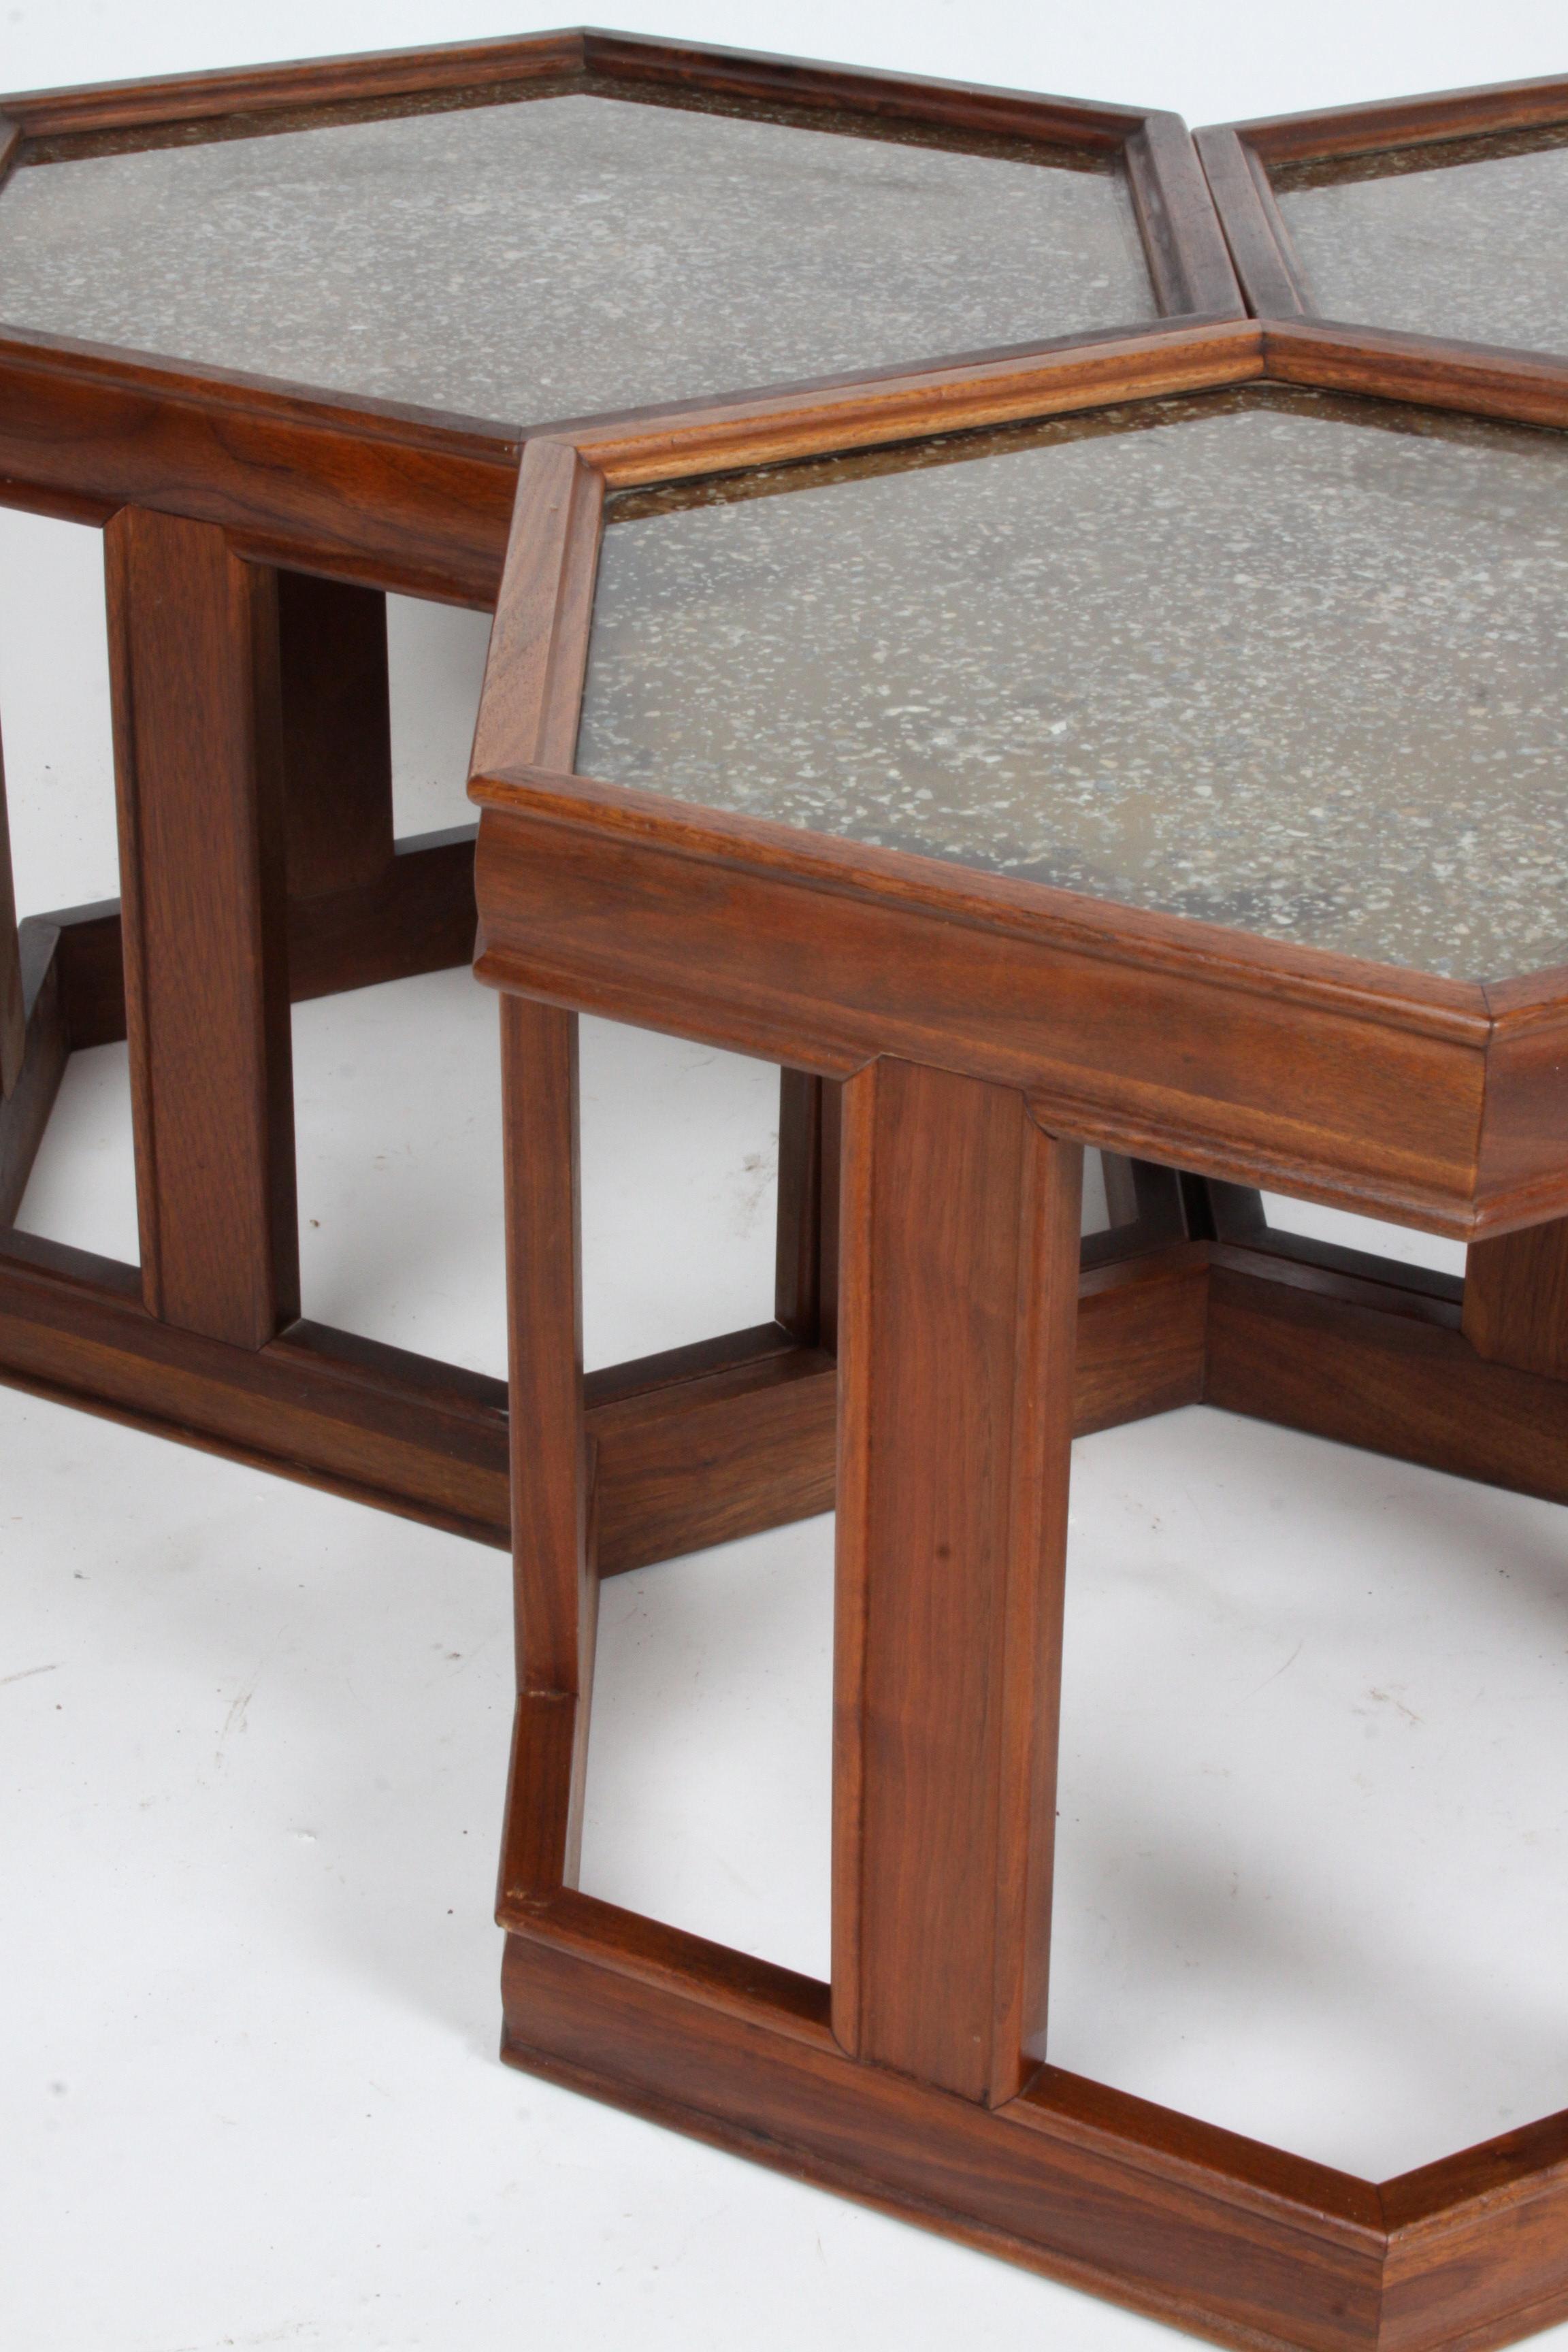  John Keal designed for Brown Saltman, Mid-Century Modern set of three hexagonal tables  that can be used as a group or separated. Frames are teak with enameled textured design under glass tops. Overall very nice original condition, some scuffs to